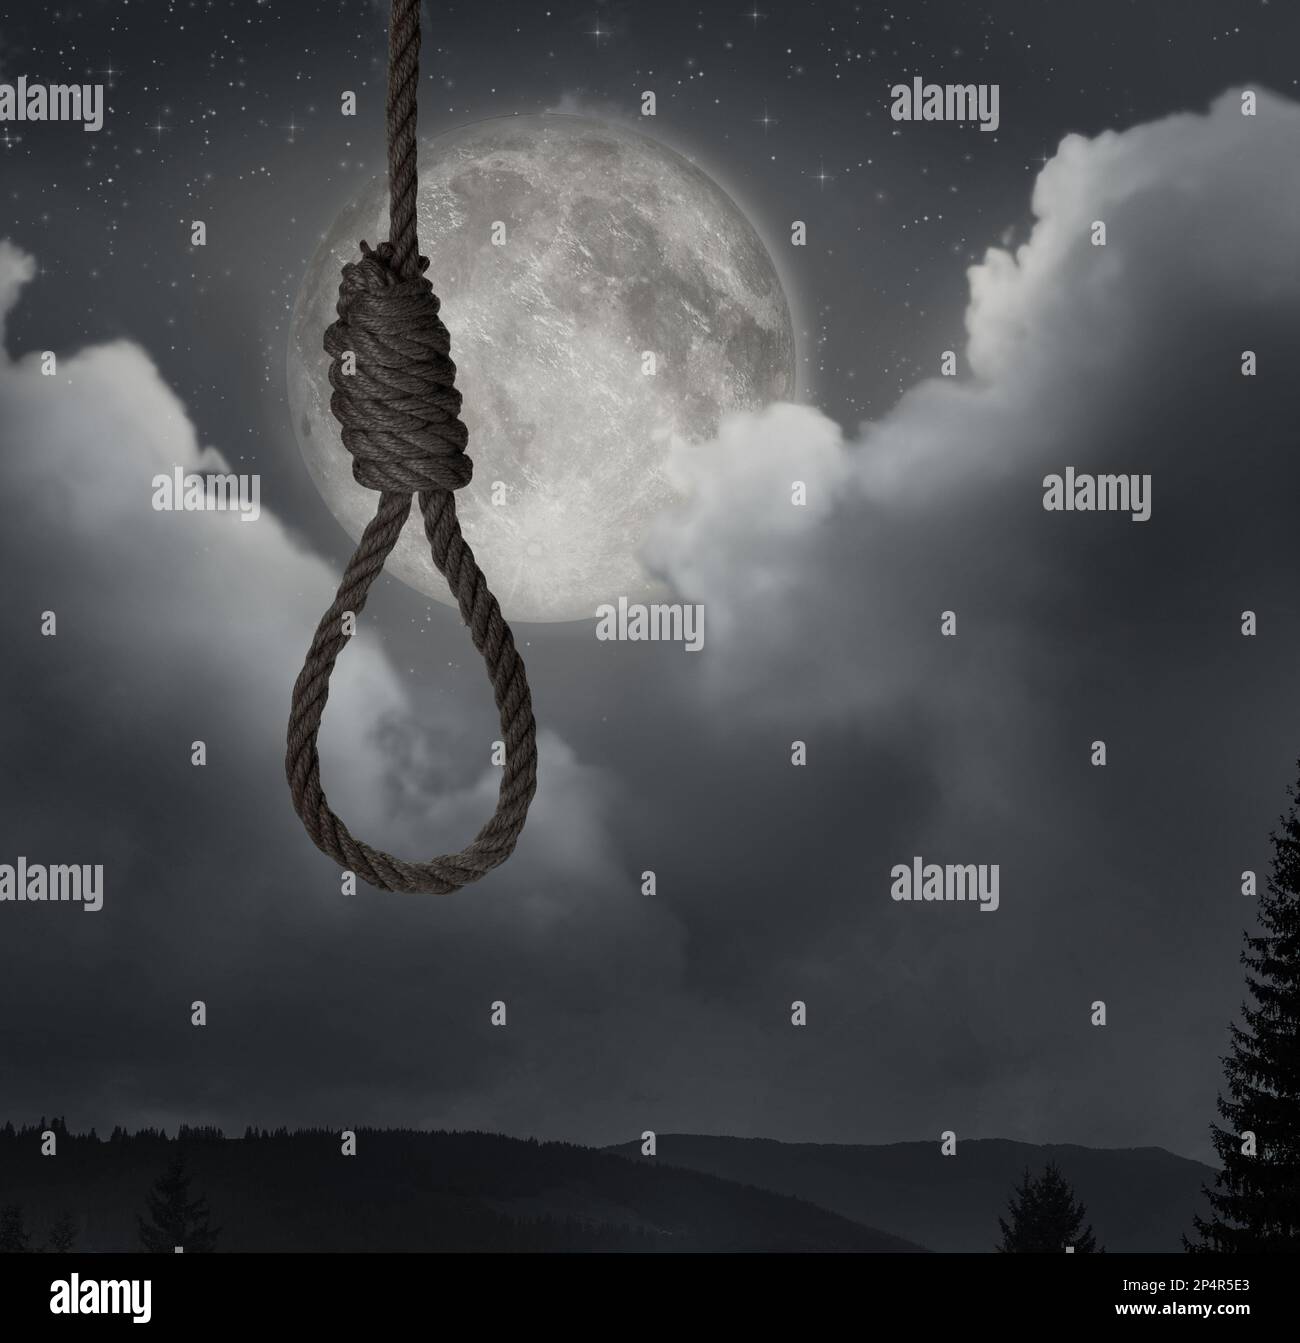 Rope noose with knot outdoors on full moon night Stock Photo